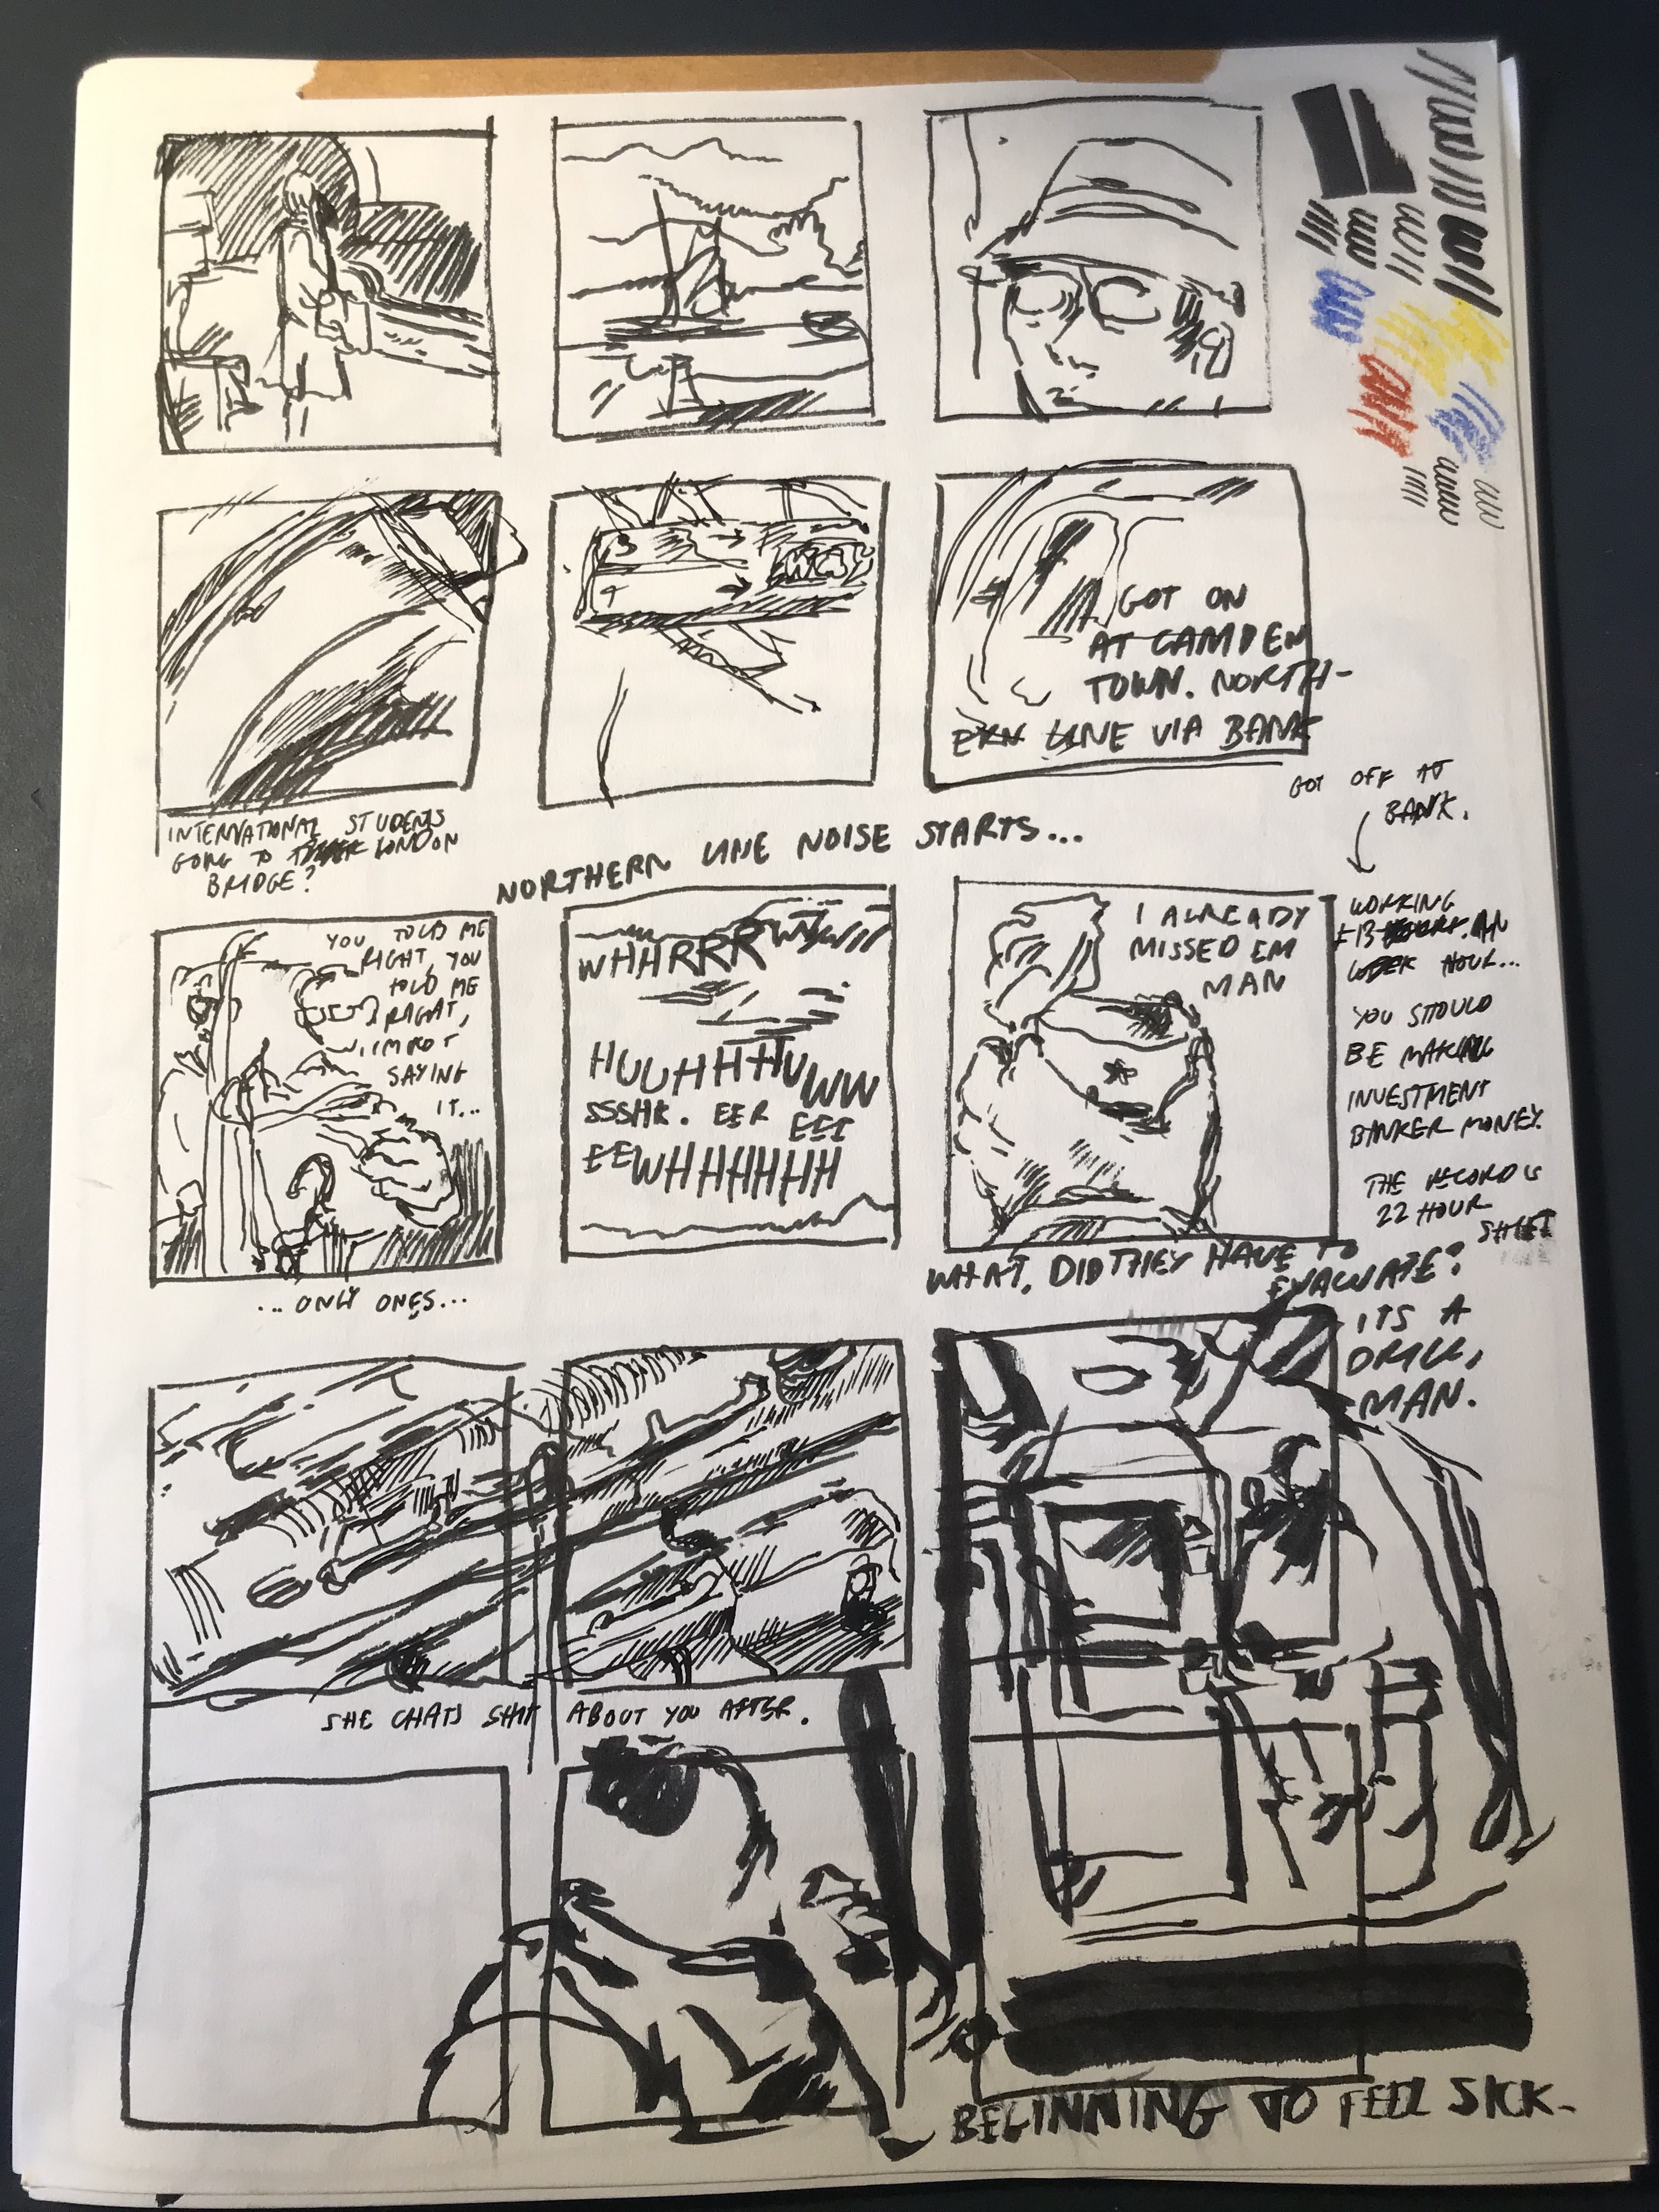 A page split up into many small squares, each with sketches of people or things seen on the train, some of the drawings overflowing the panels.